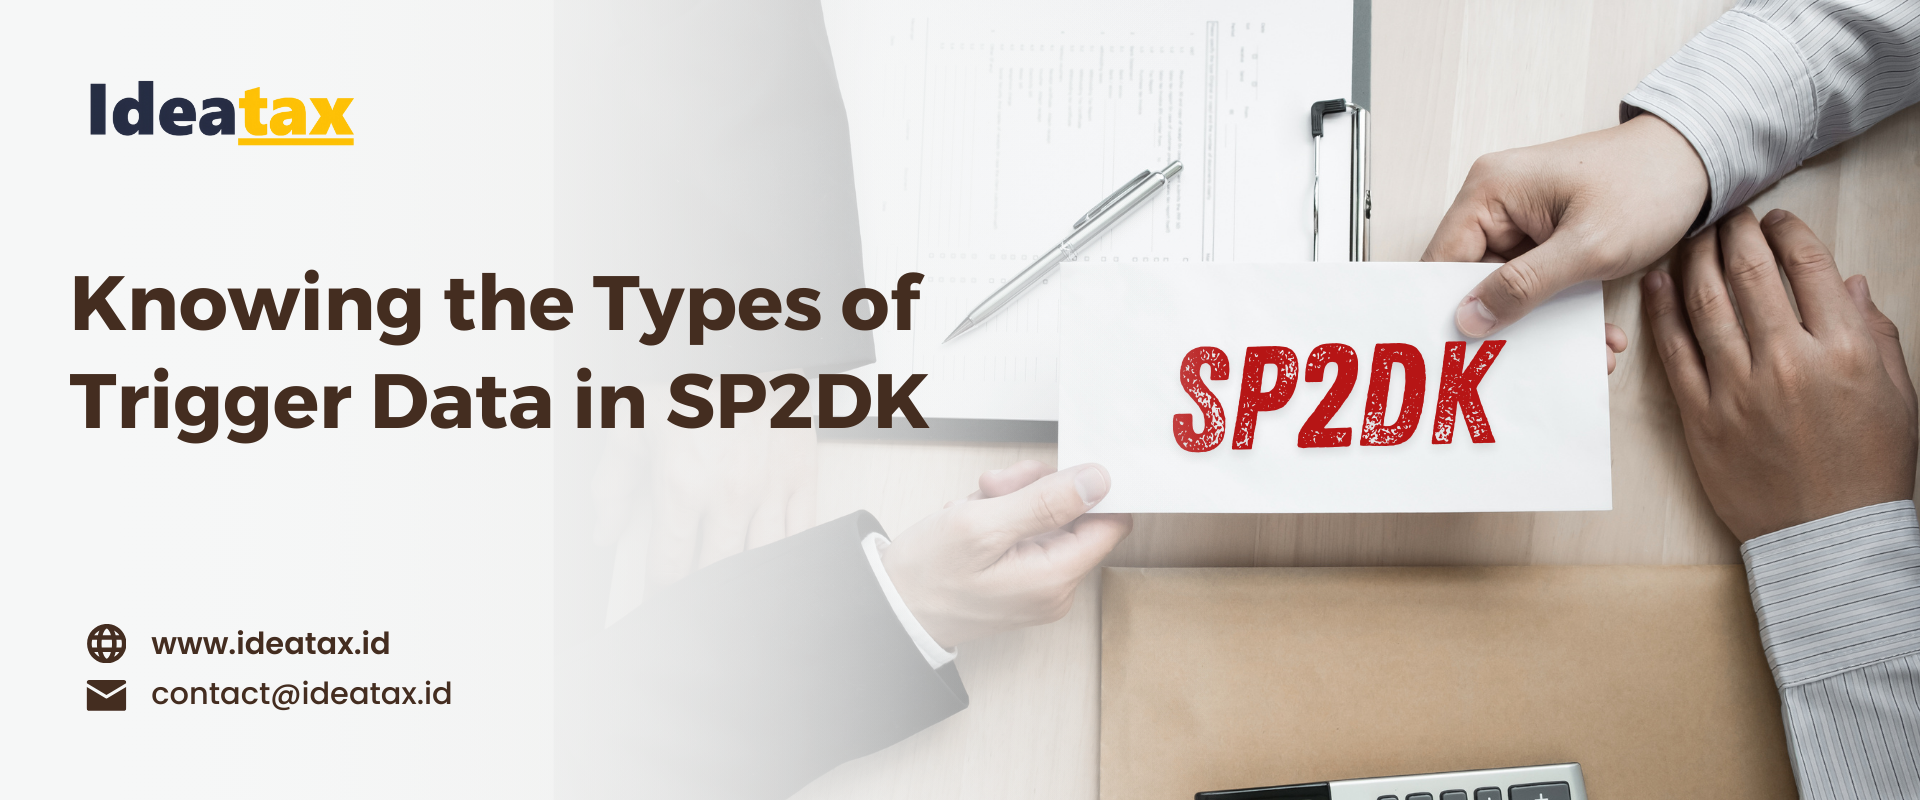 Knowing the Types of Trigger Data in SP2DK